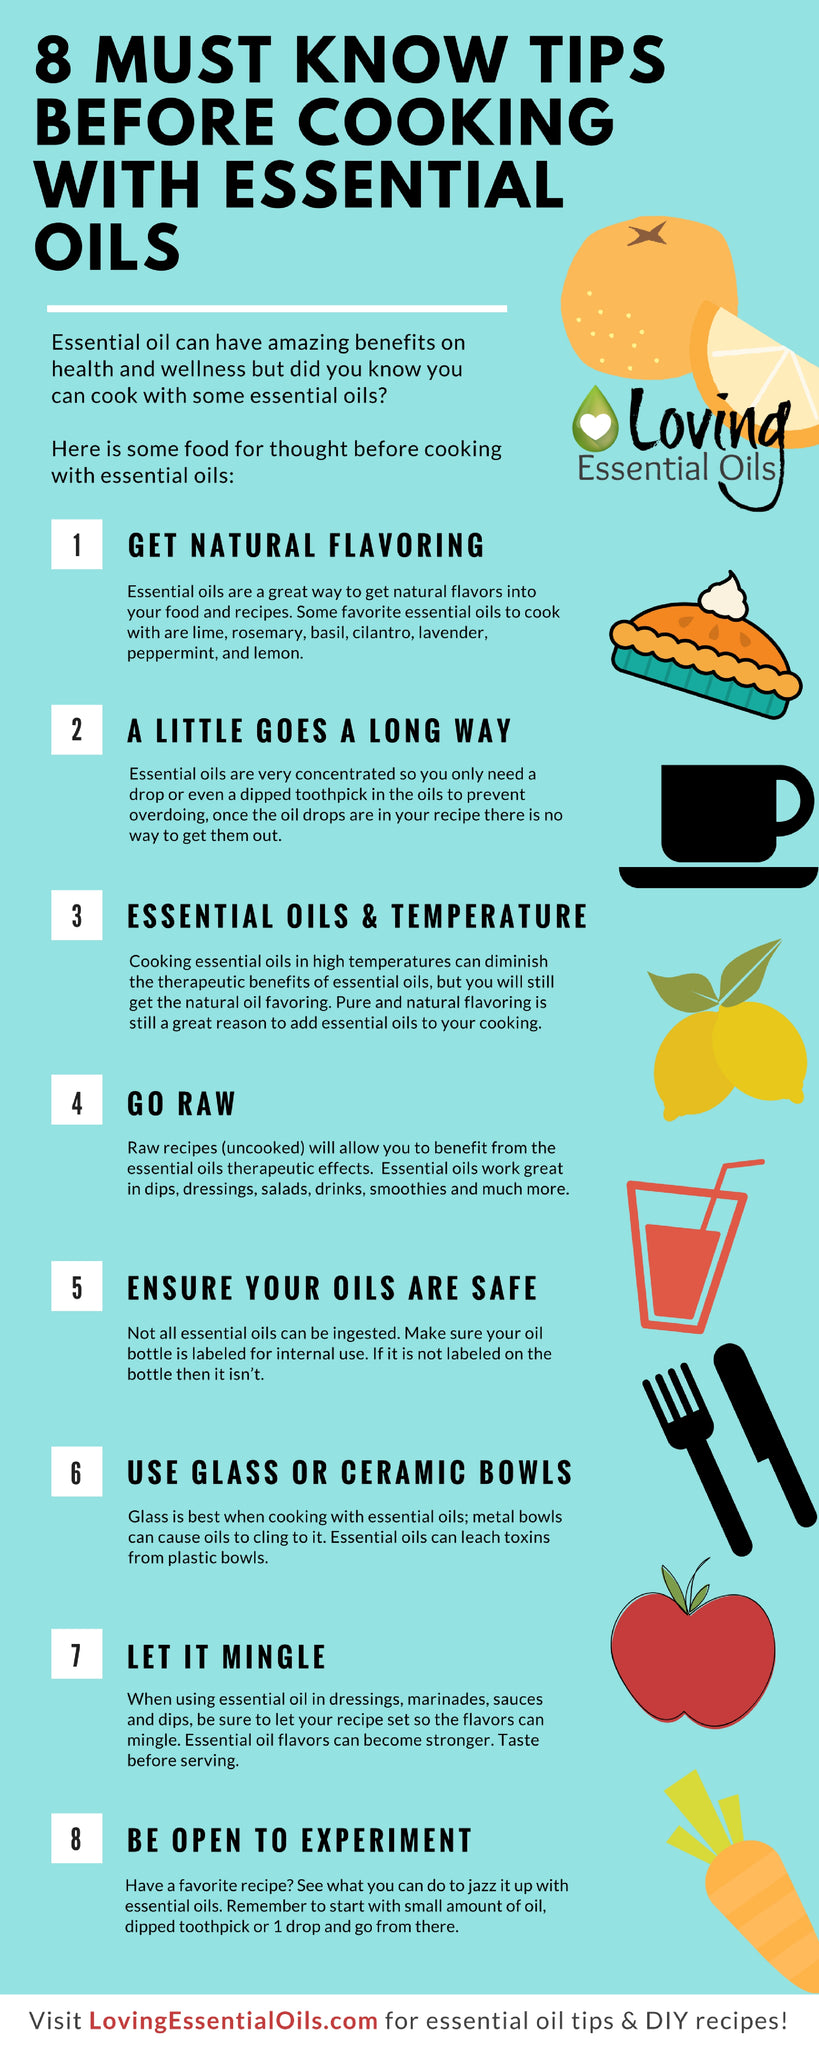 8 Tips for cooking with essential oils